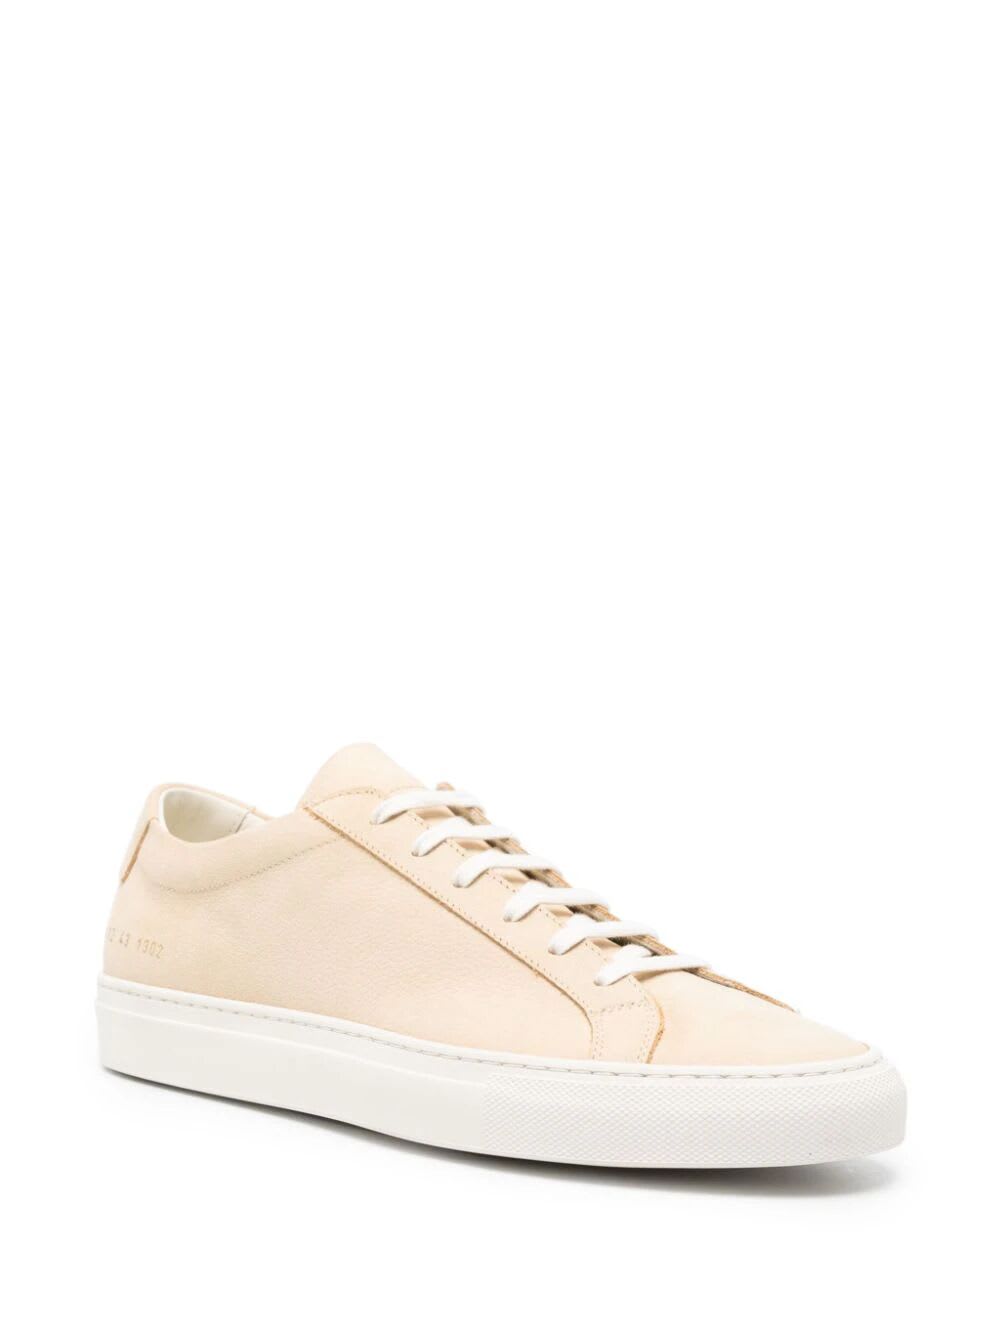 Shop Common Projects Contrast Achilles Sneaker In Tan